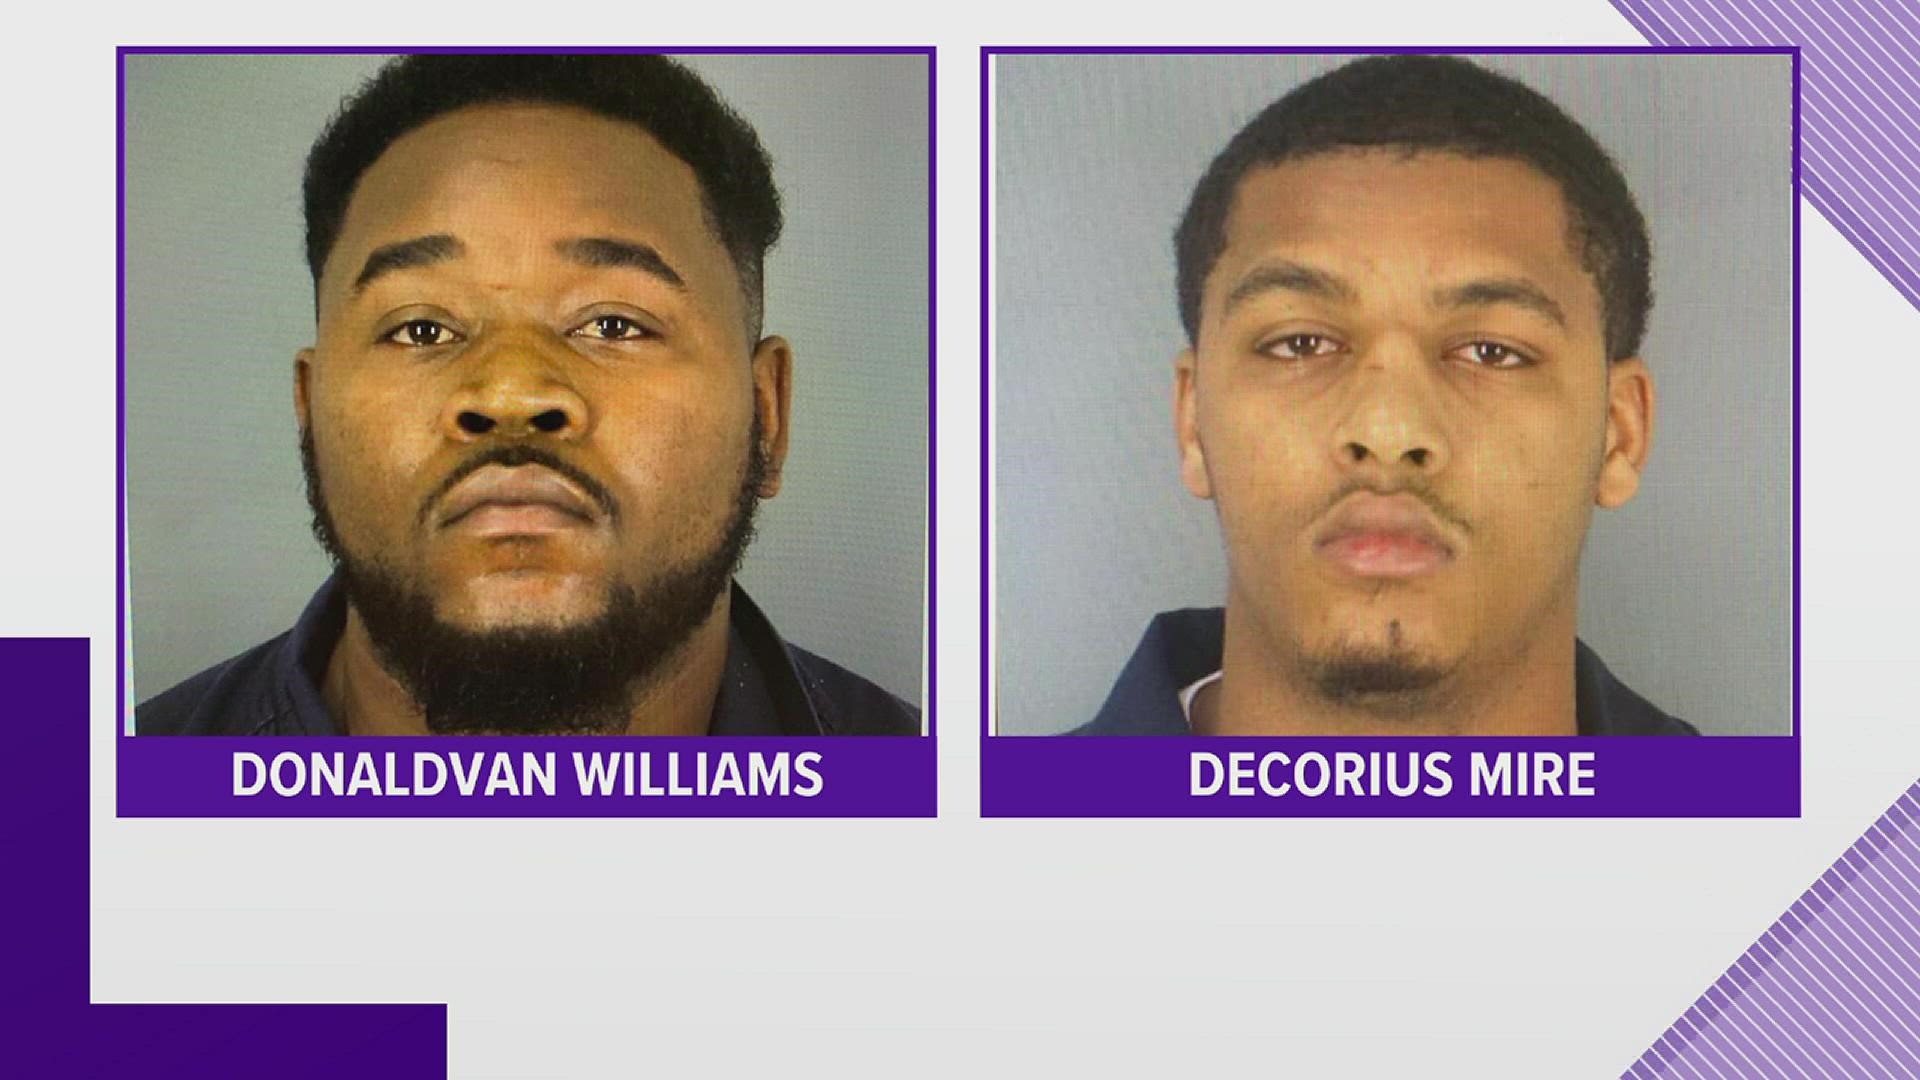 Suspect Donaldvan Williams, 28, was arrested for his outstanding warrant on September 20, 2022. The other suspect, Decorius Mire, 23, has not yet been found.